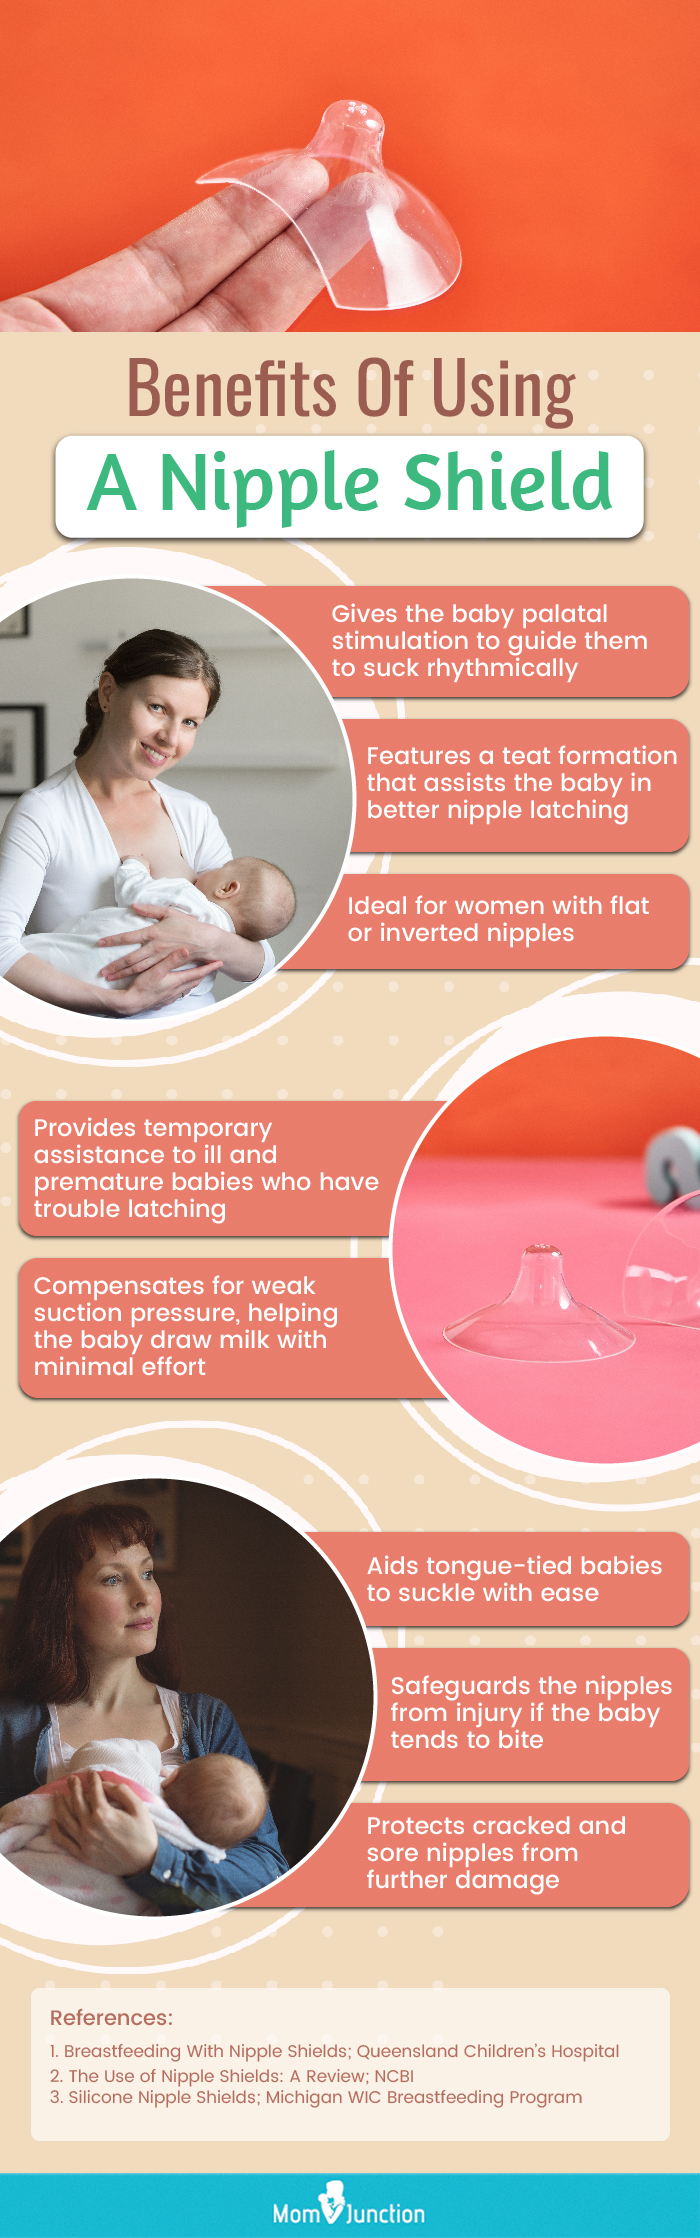 Benefits Of Using A Nipple Shield (infographic)